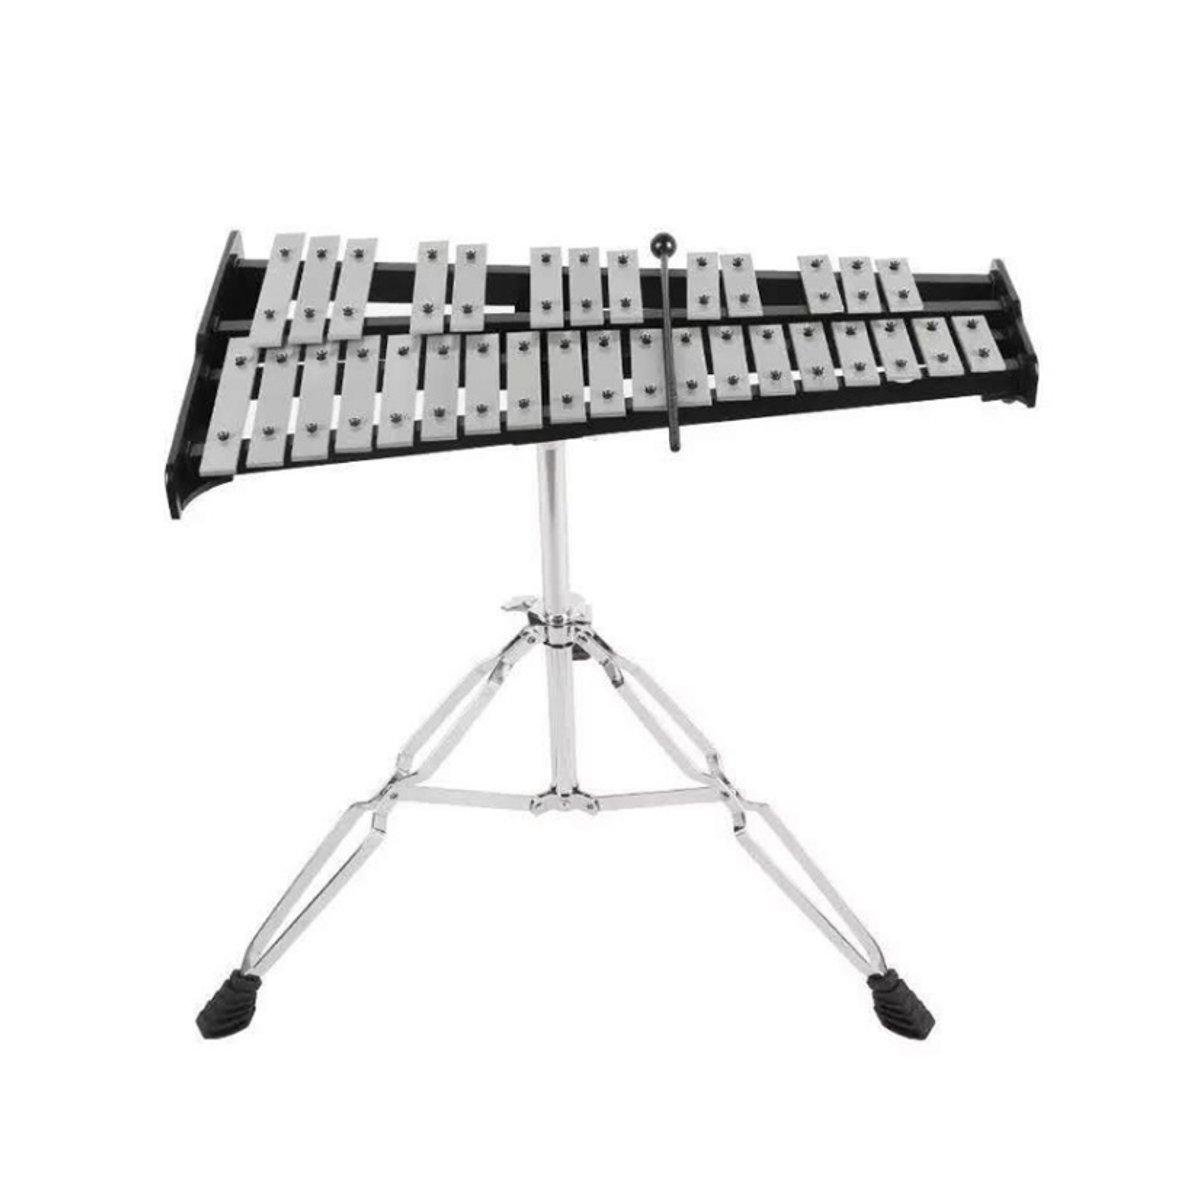 32 Note Xylophone Aluminum Piano Orff Instrument with Bag